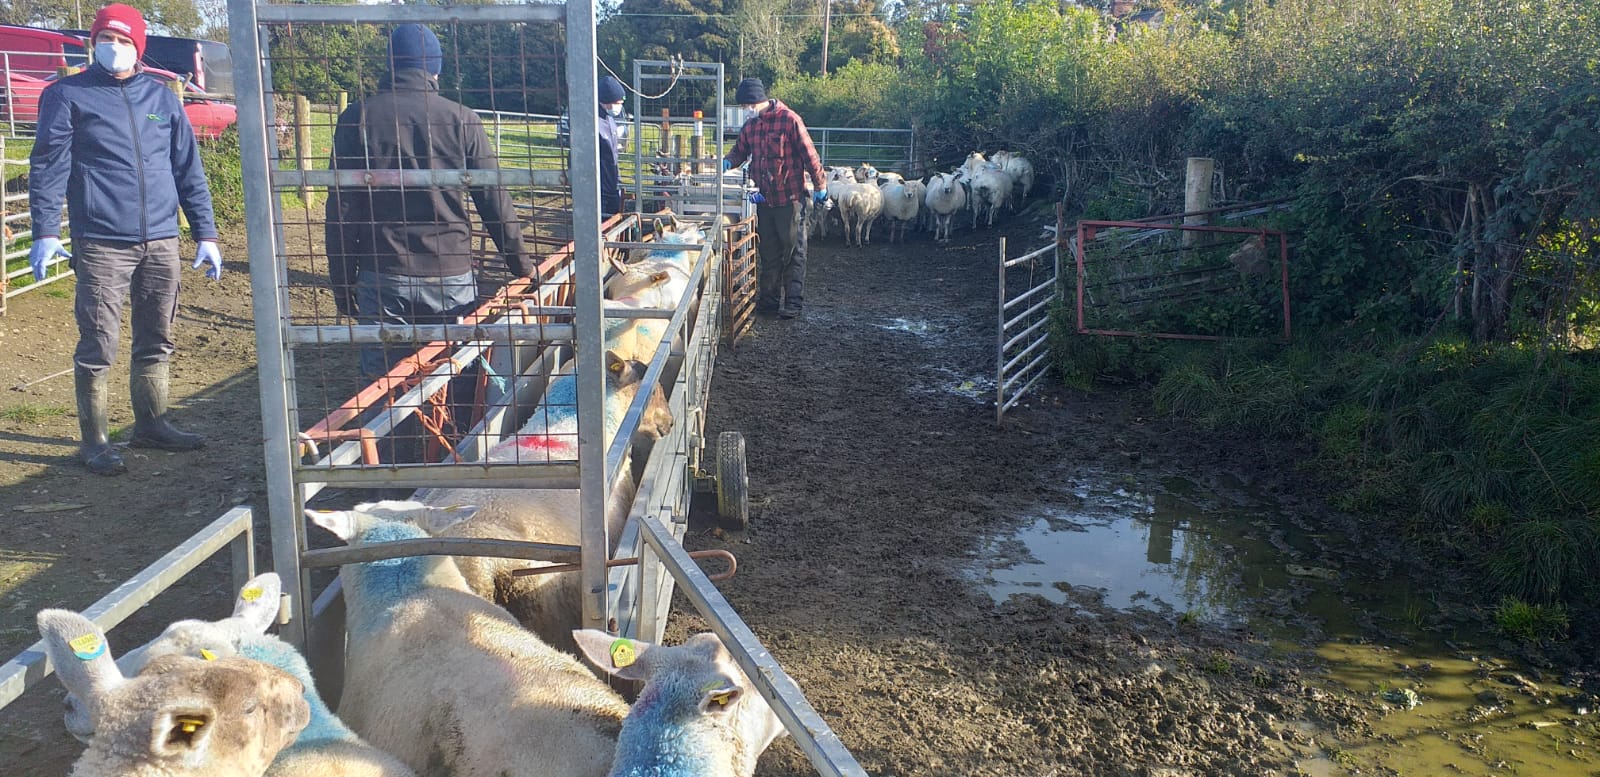 You are currently viewing Check out preparation for breeding season on Ovidata farmer Peadar Kearney’s flock!